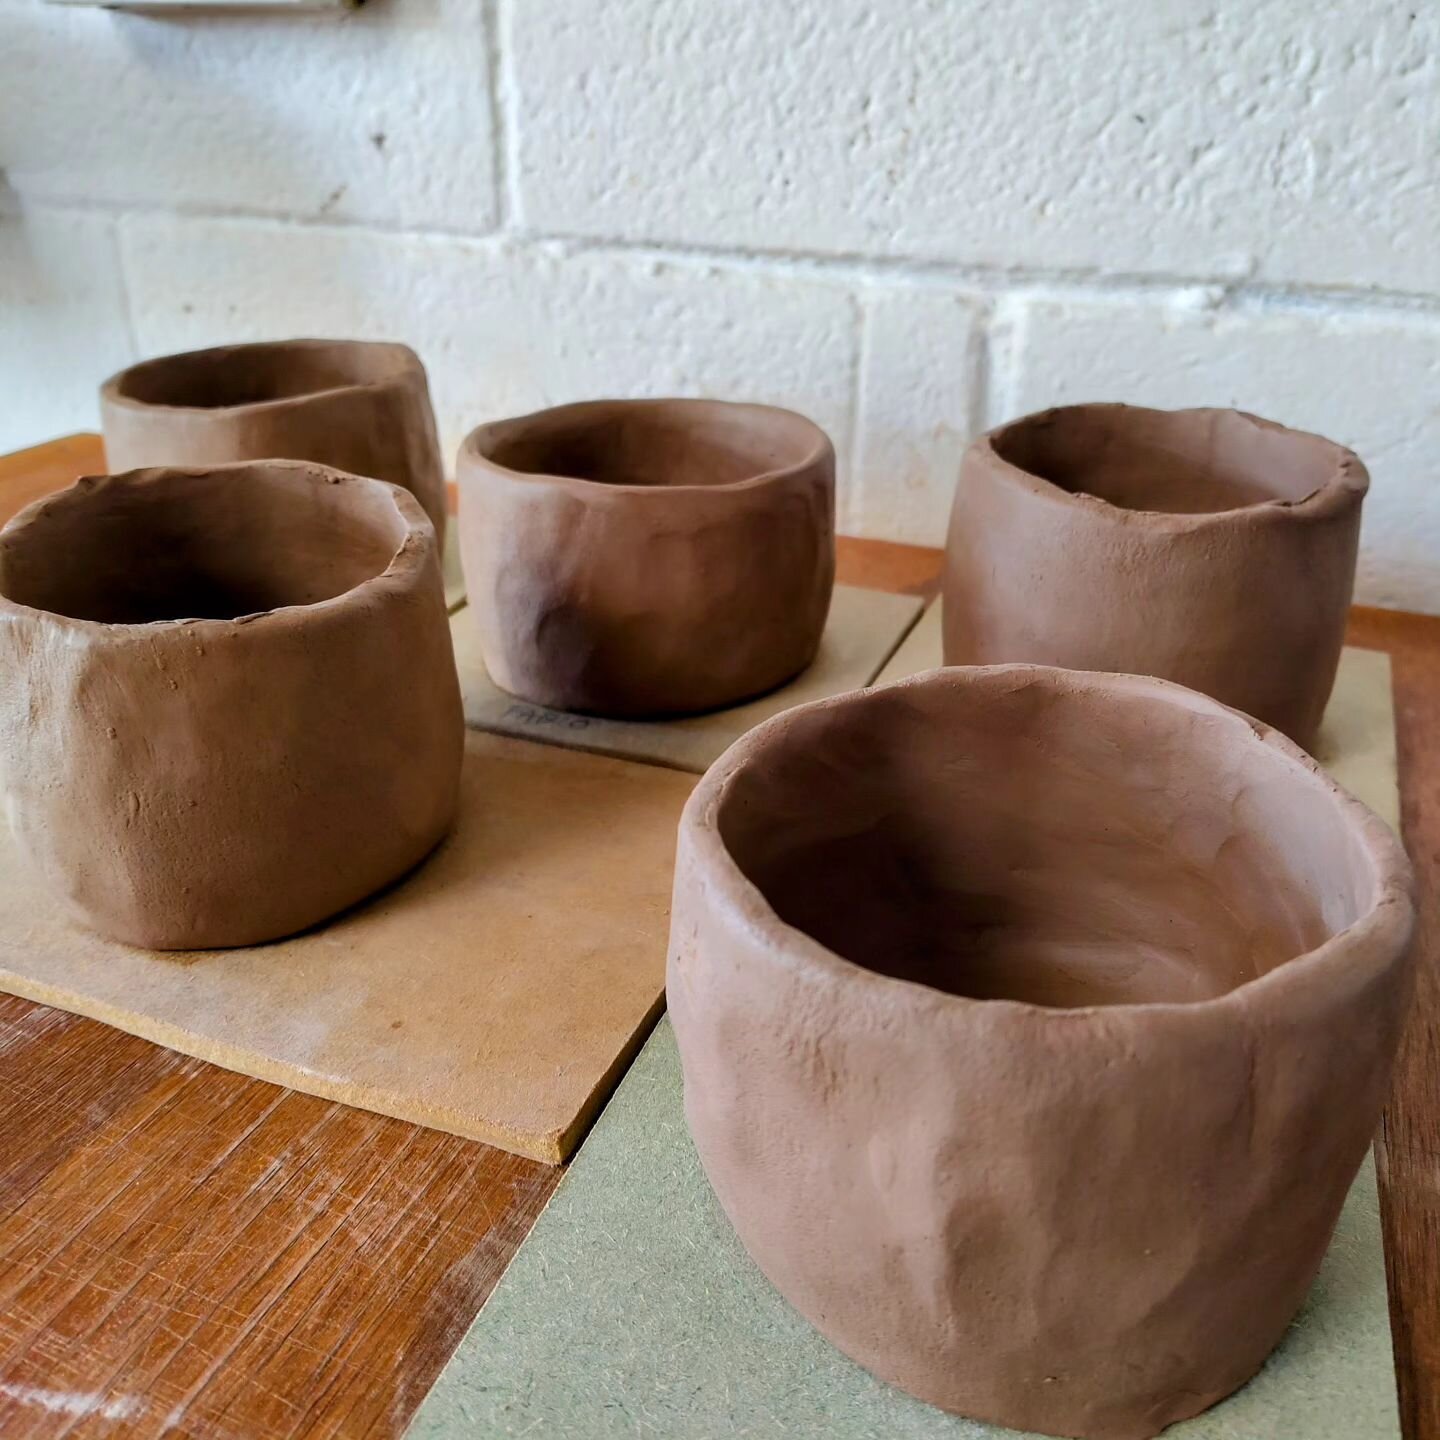 Cups in the making! These will be with handles and will glaze with tenmoku glaze. Modern rustic hand-built cups with earthy stoneware.

#handmadeceramics #ceramics #ceramica #handbuildingwithclay #modernrustic #cupsforcafe #tableware #ceramictablewar